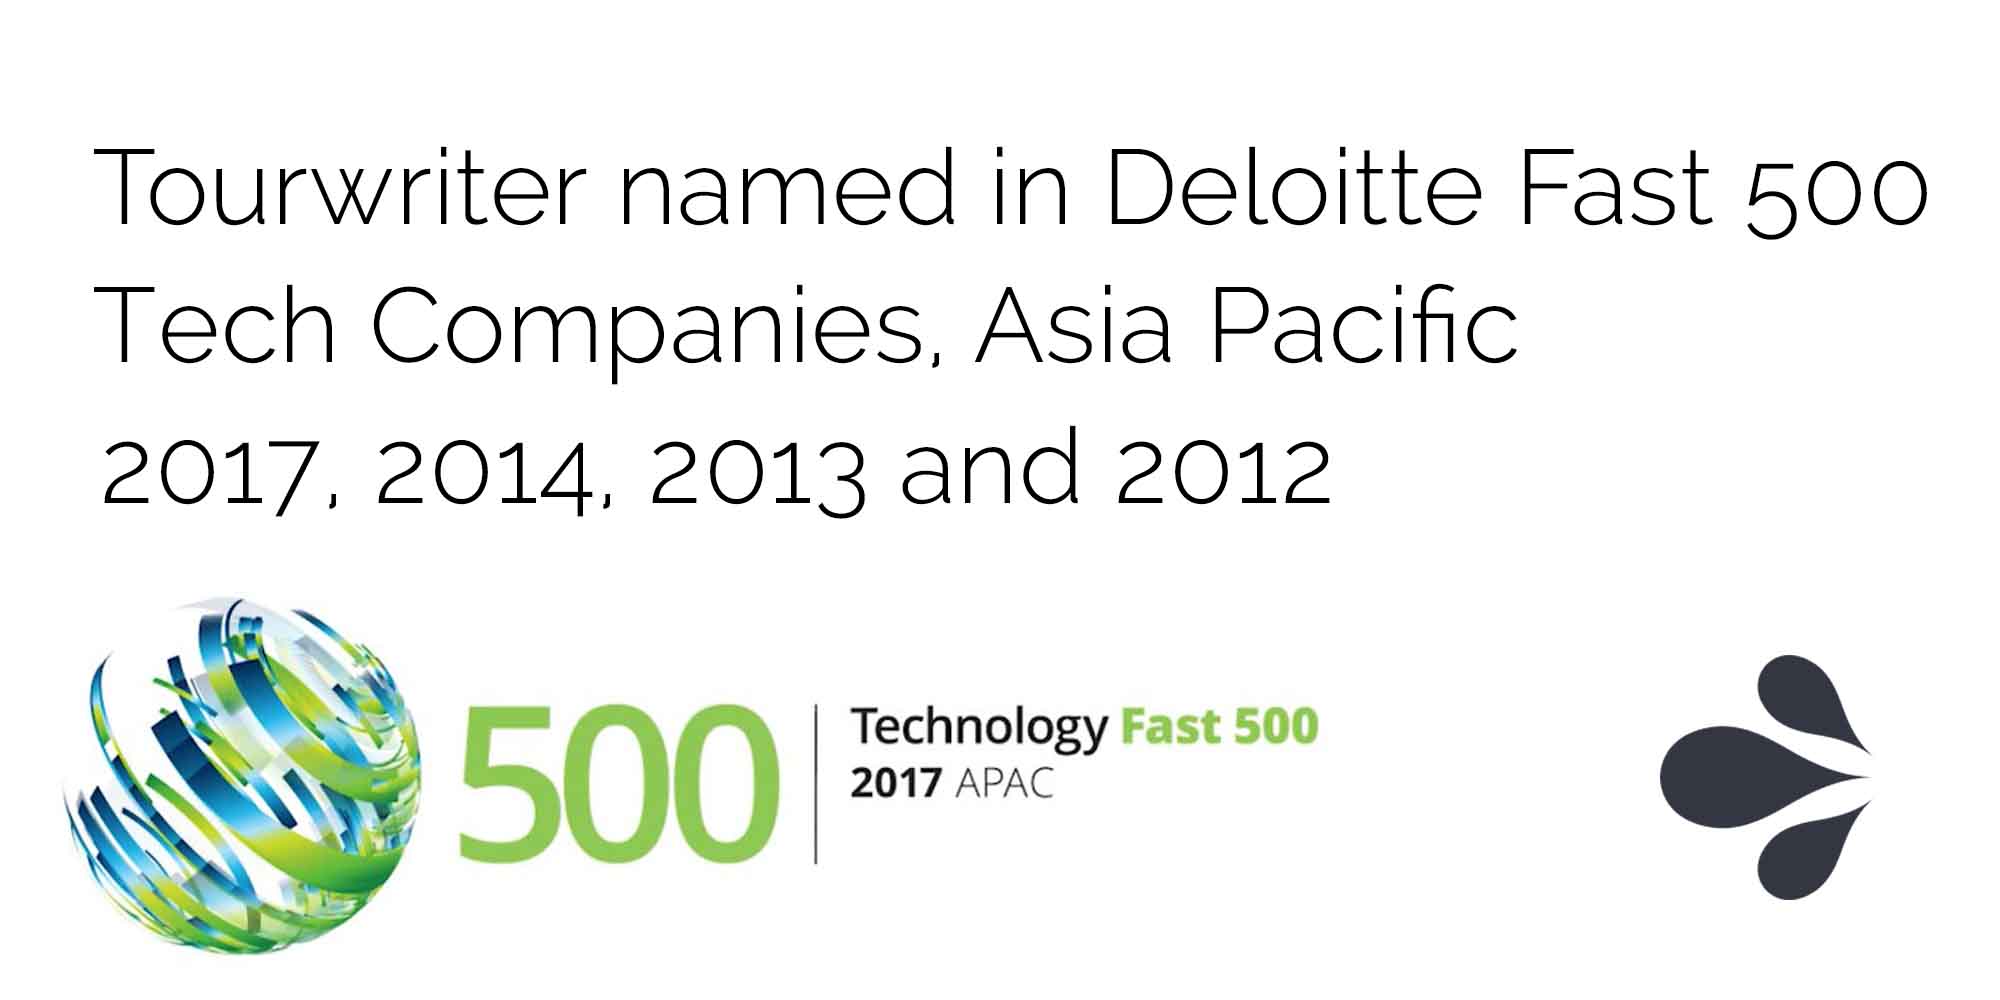 Tourwriter named in Deloitte Fast 500 index 2017, 2014, 2013 and 2012